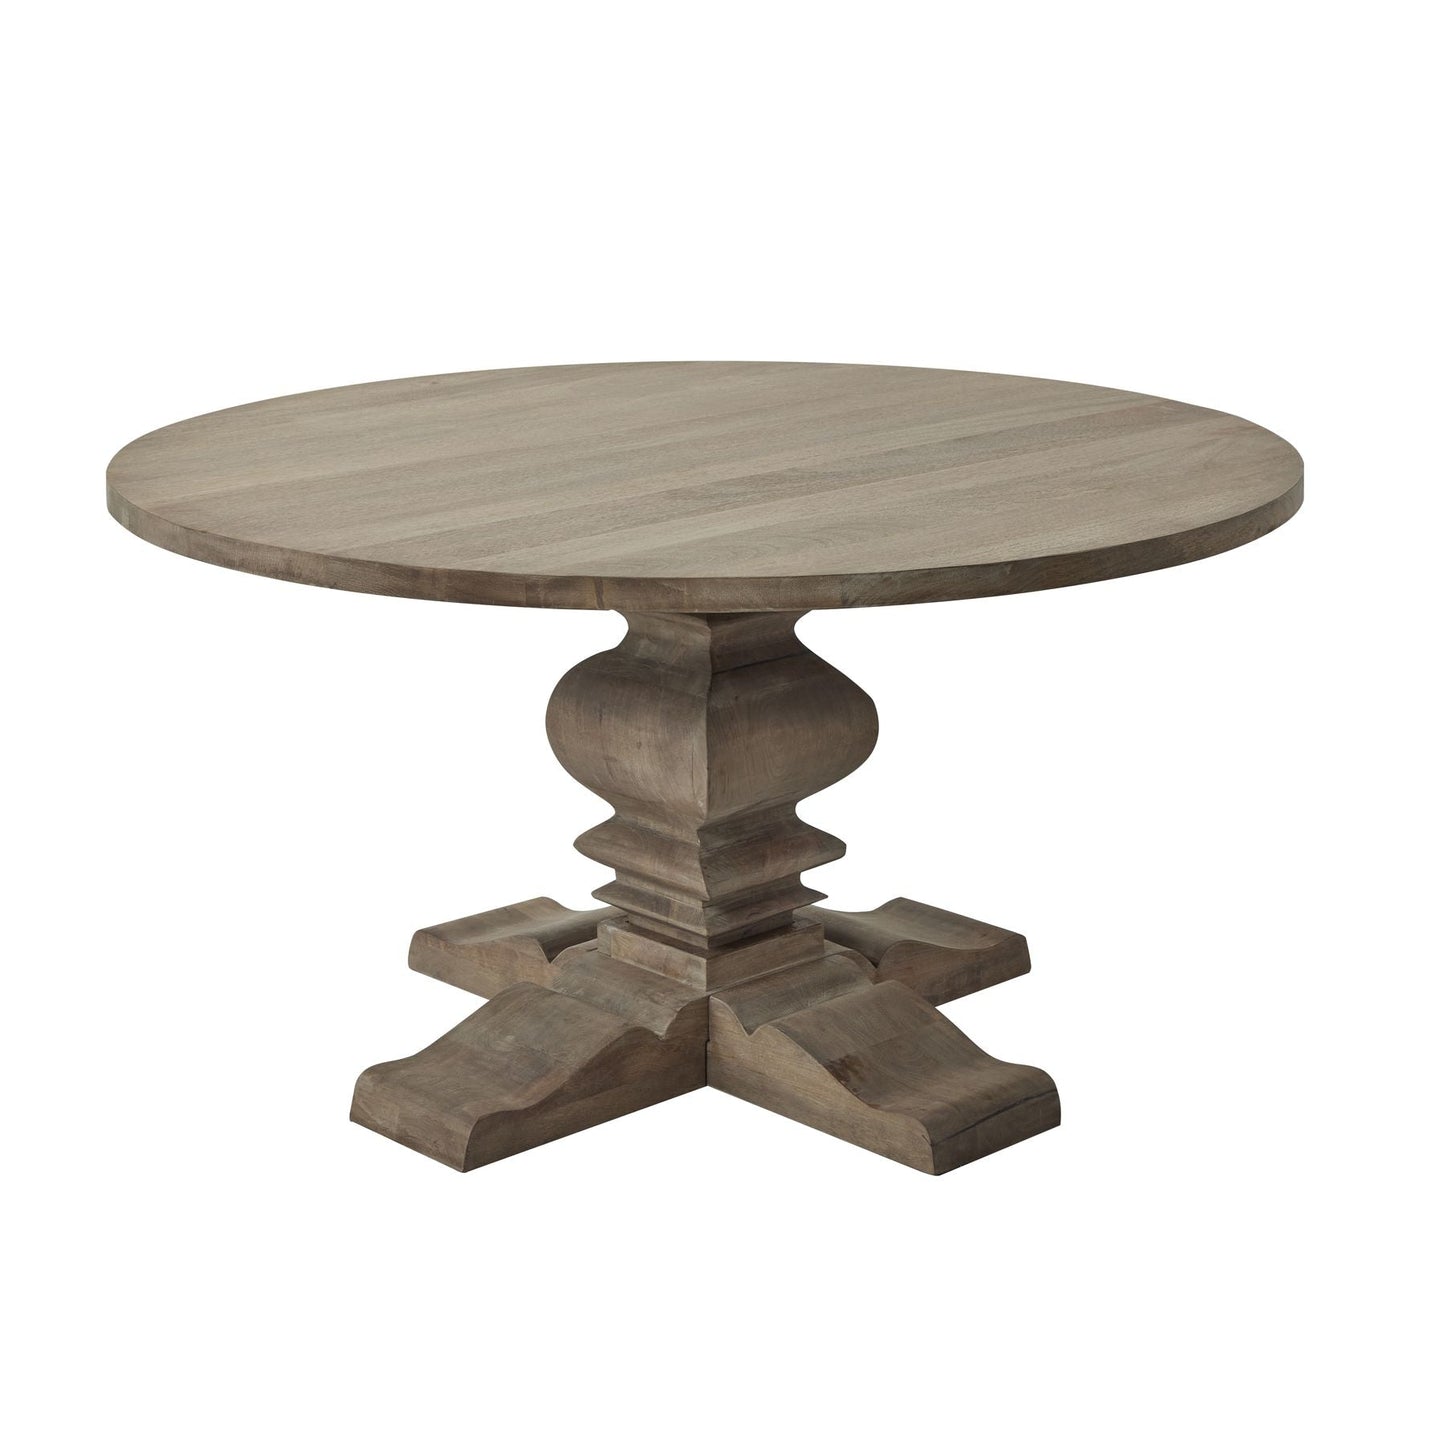 Downton Round Pedestal Dining Table